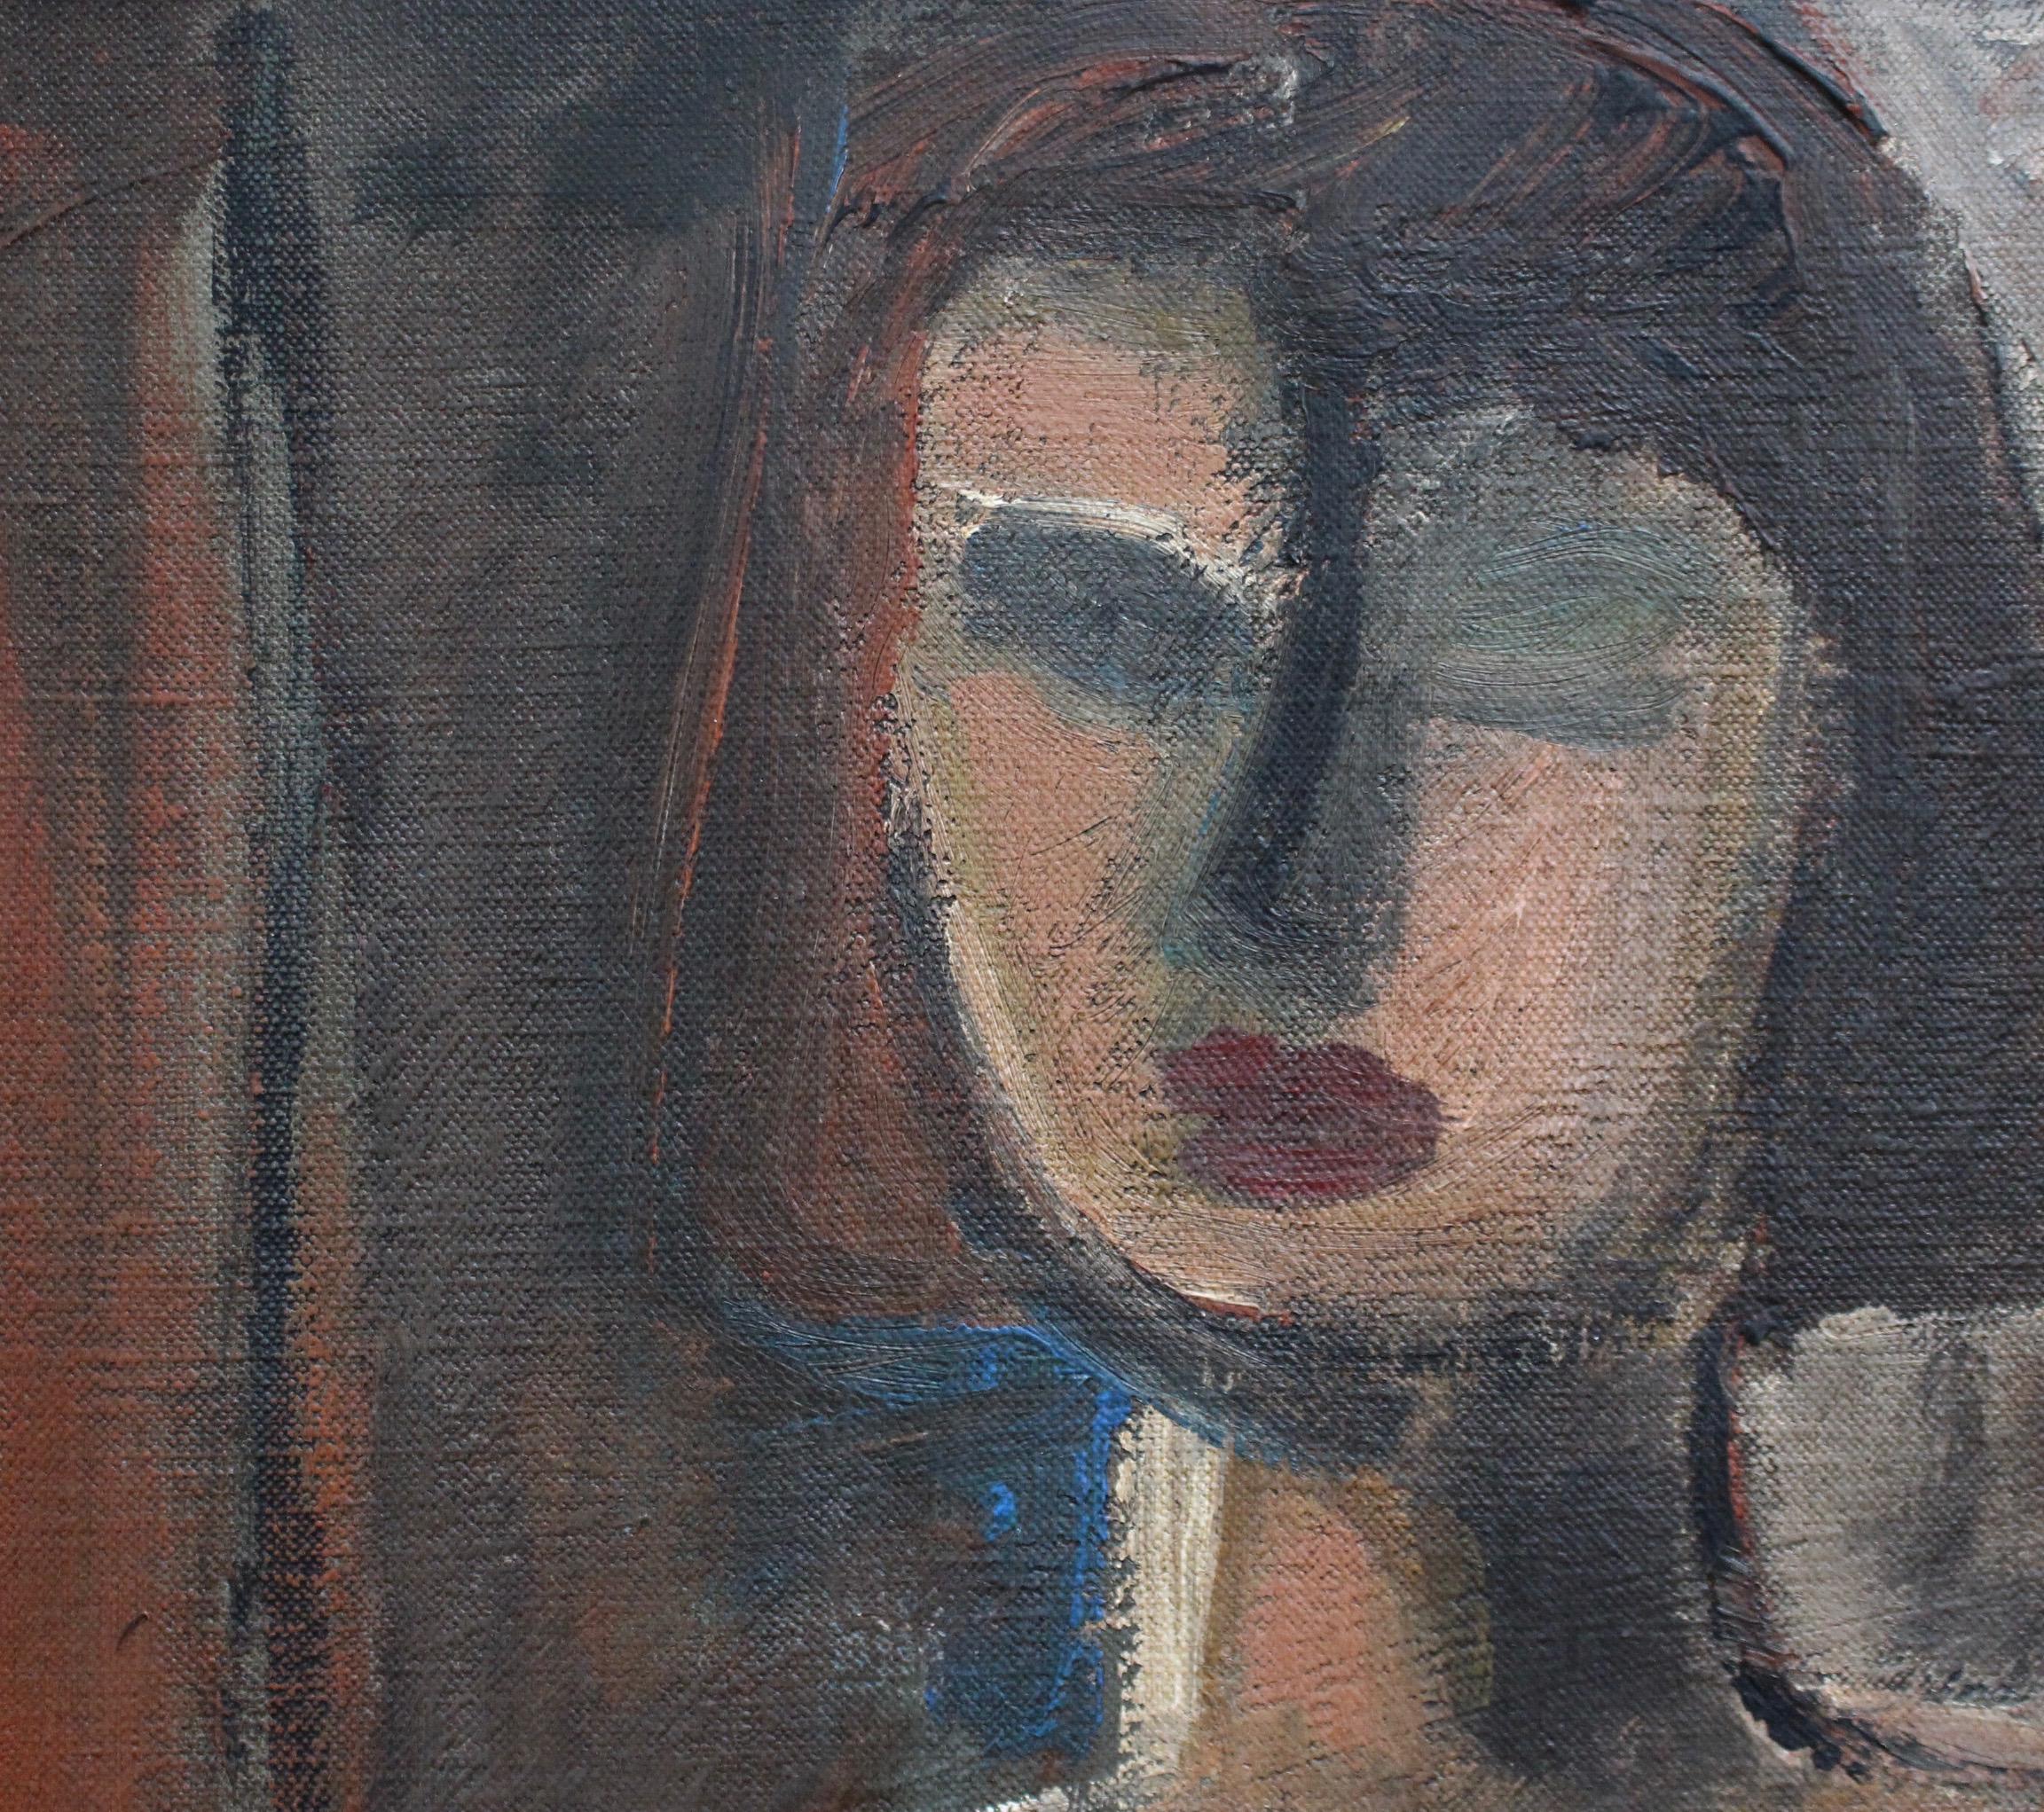 'Portrait of Young Woman', oil on canvas, German School (circa 1940s - 60s). An extraordinary mid-century portrait of a young woman painted in the style of expressionists / cubists of the era. Unsure if she is simply a model sitting for the artist